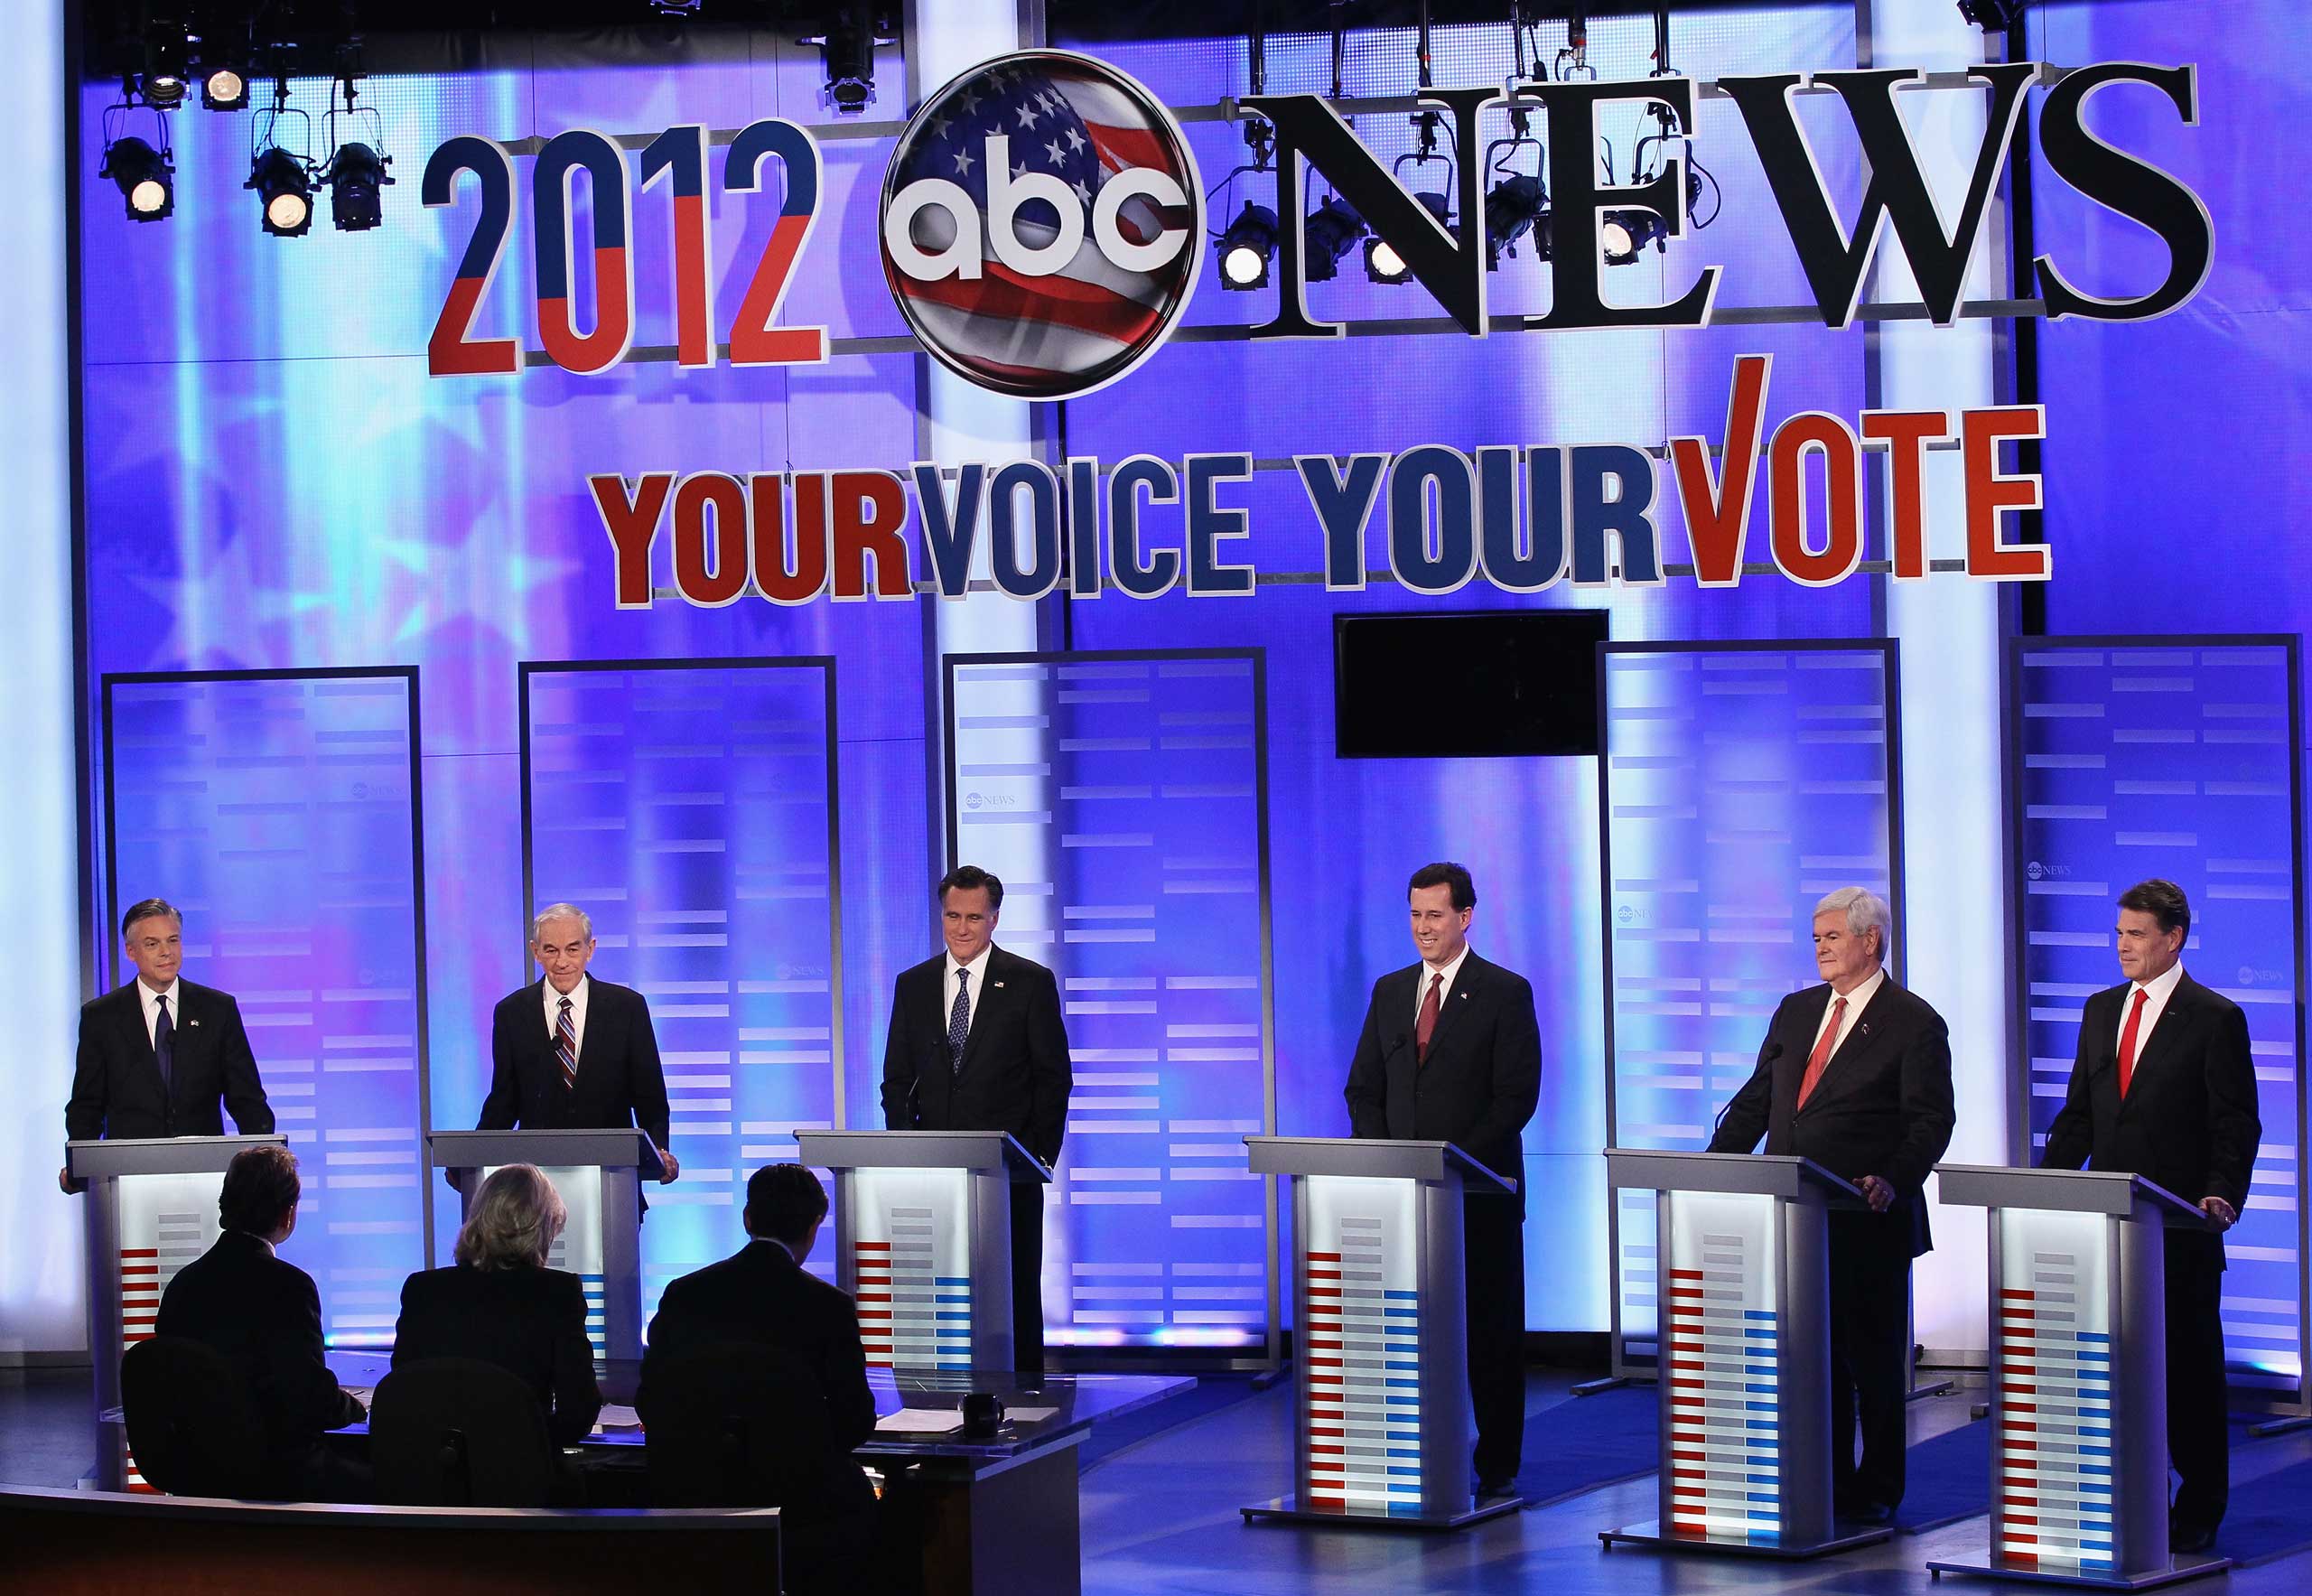 Republican presidential candidates are introduced during the ABC News, Yahoo! News, and WMUR Republican Presidential Debate at Saint Anselm College in Manchester, N.H. on Jan. 7, 2012. (Win McNamee—Getty Images)